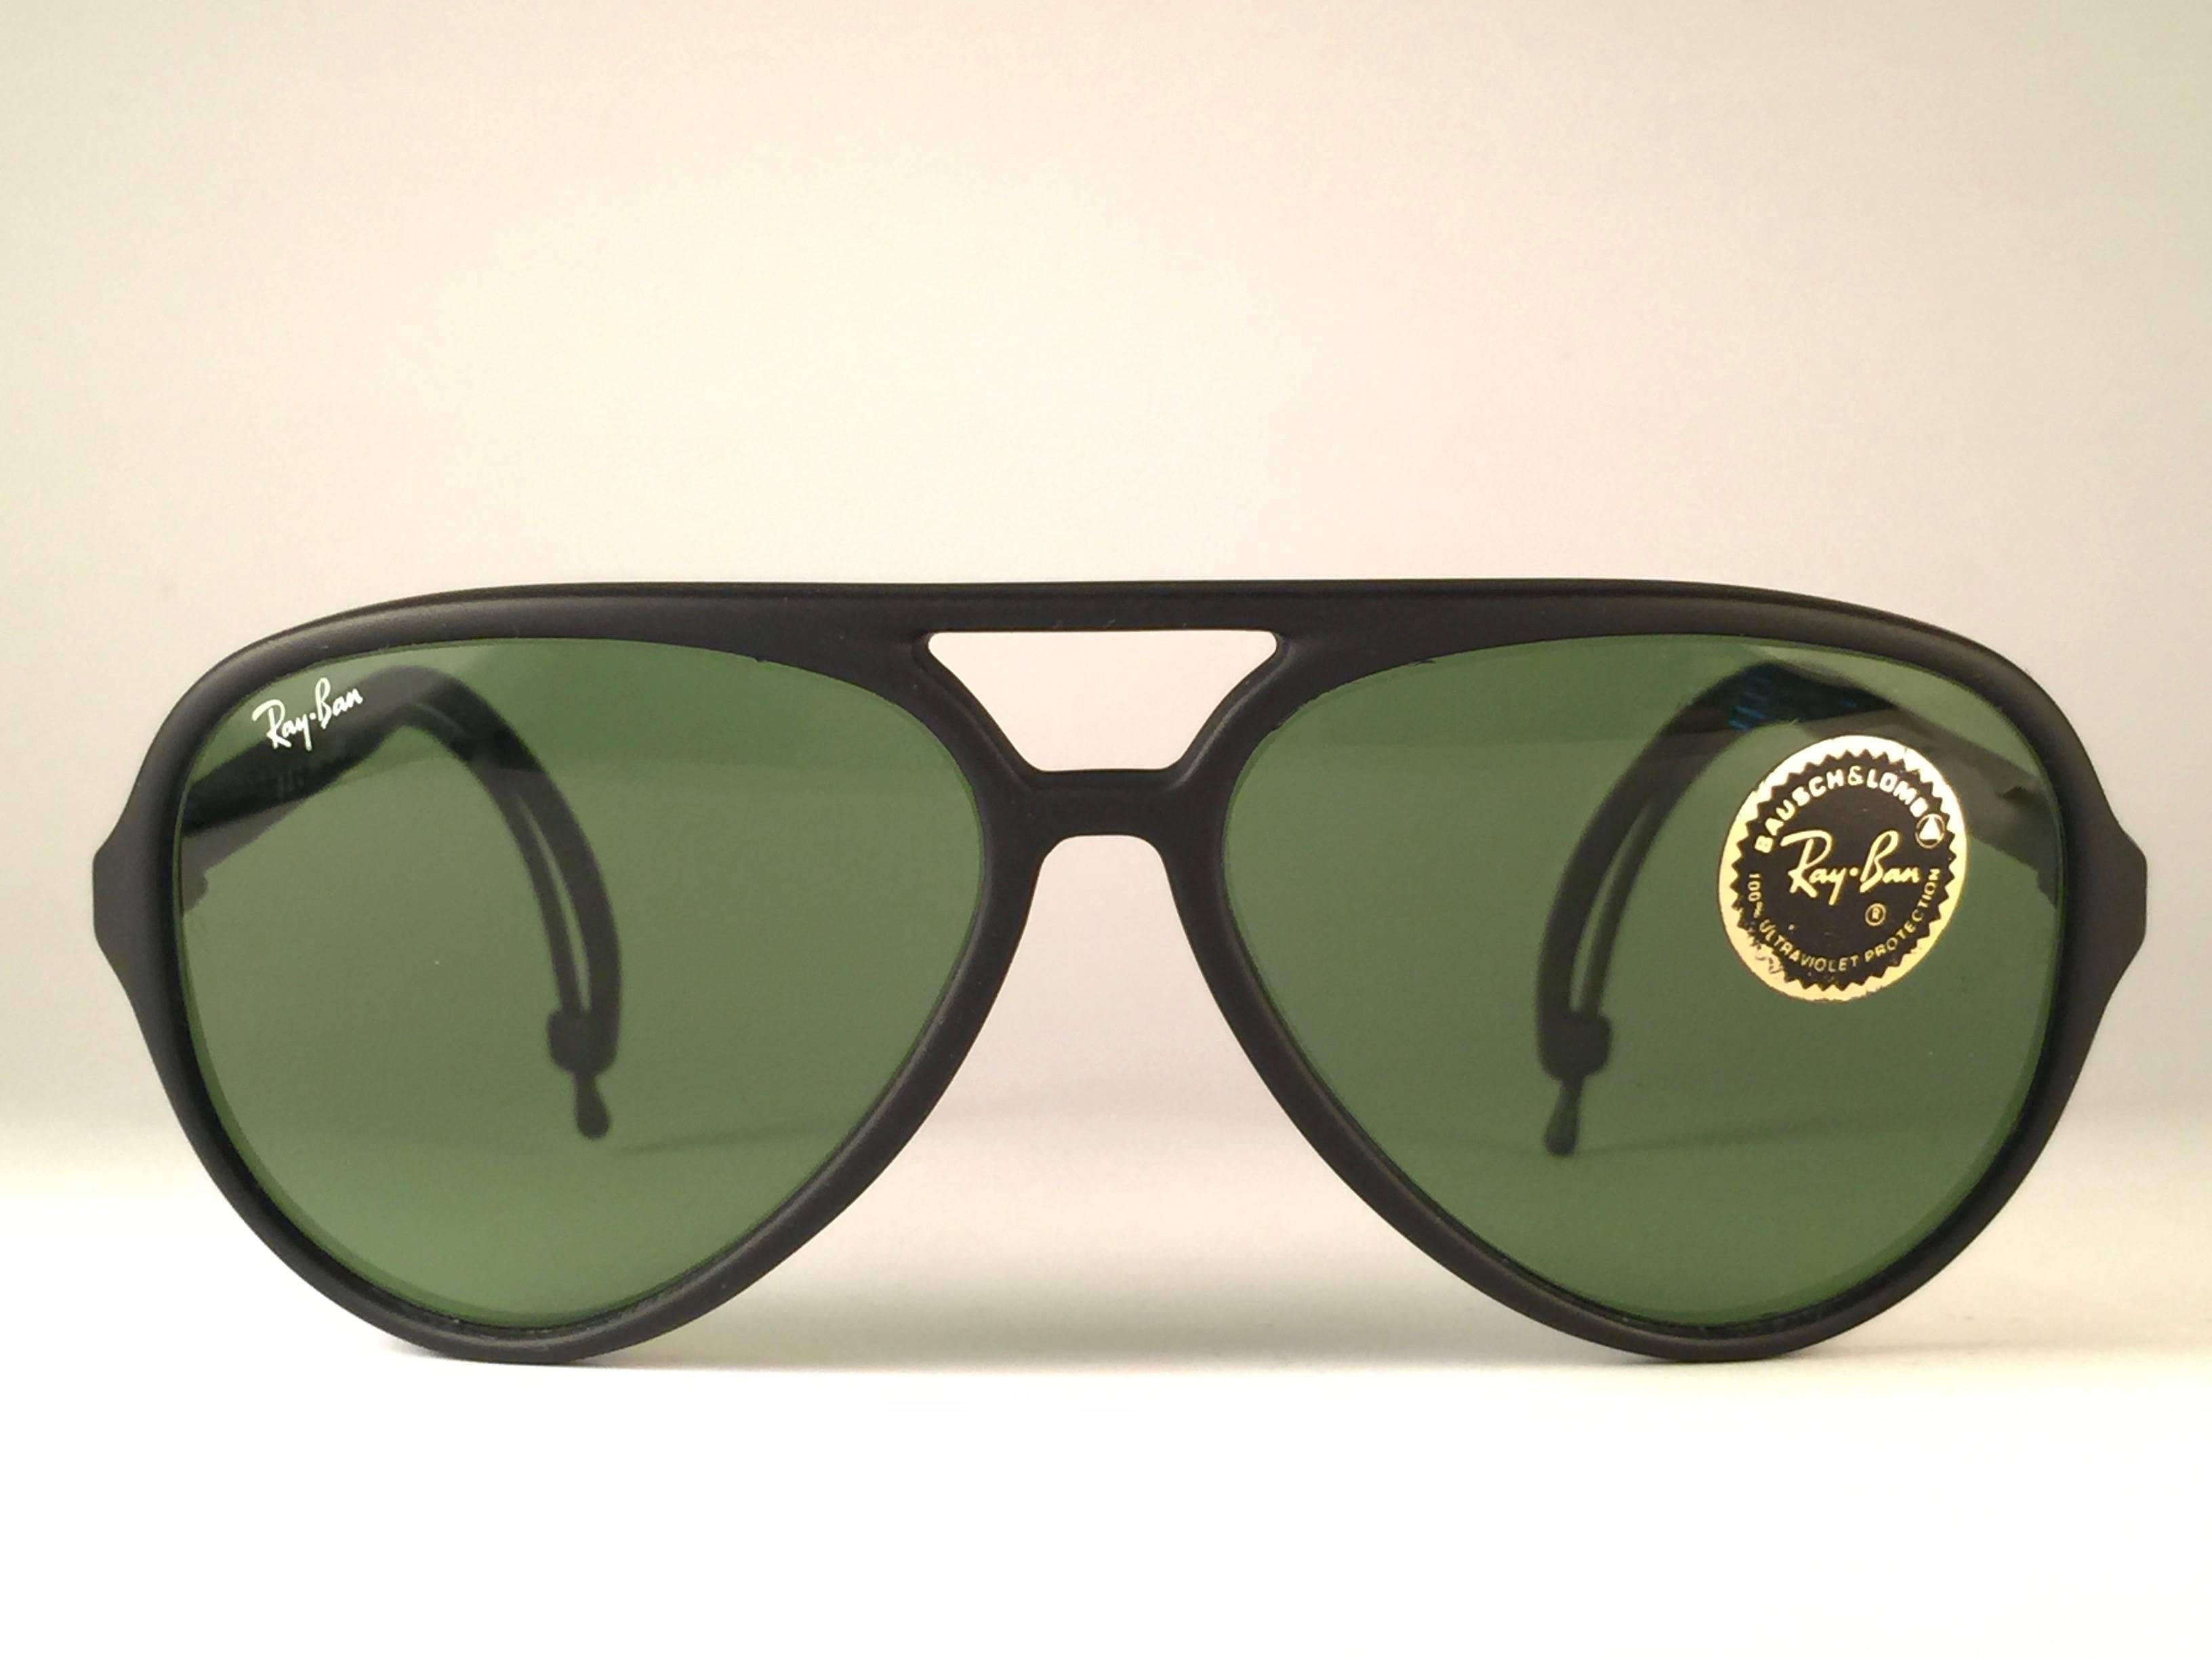 New Rare Vintage Ray Ban Sports Series 4  sunglasses in Black frame.  Lenses are RB3 Green B&L etched in the lenses.   

Comes with its original Ray Ban B&L case.   
This piece may show minor sign of wear due to storage.   
A seldom piece in new,